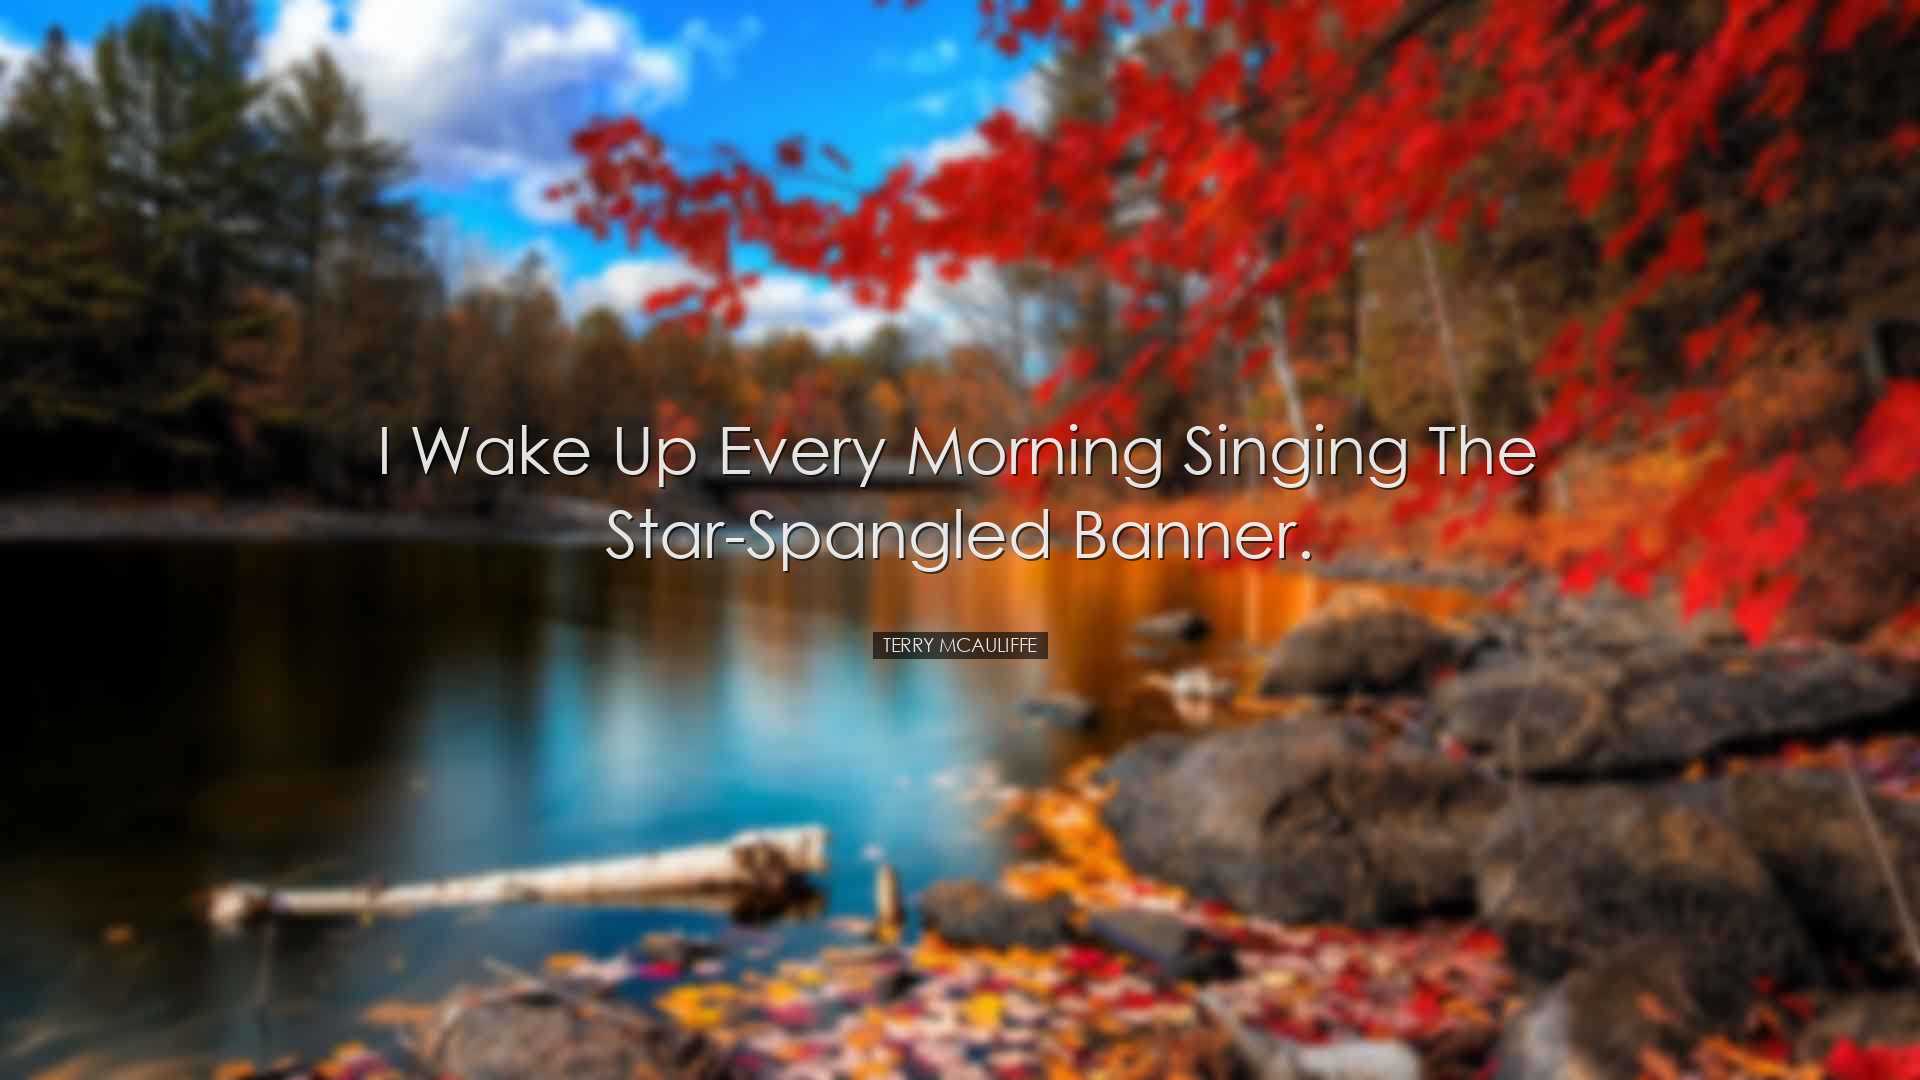 I wake up every morning singing The Star-Spangled Banner. - Terry